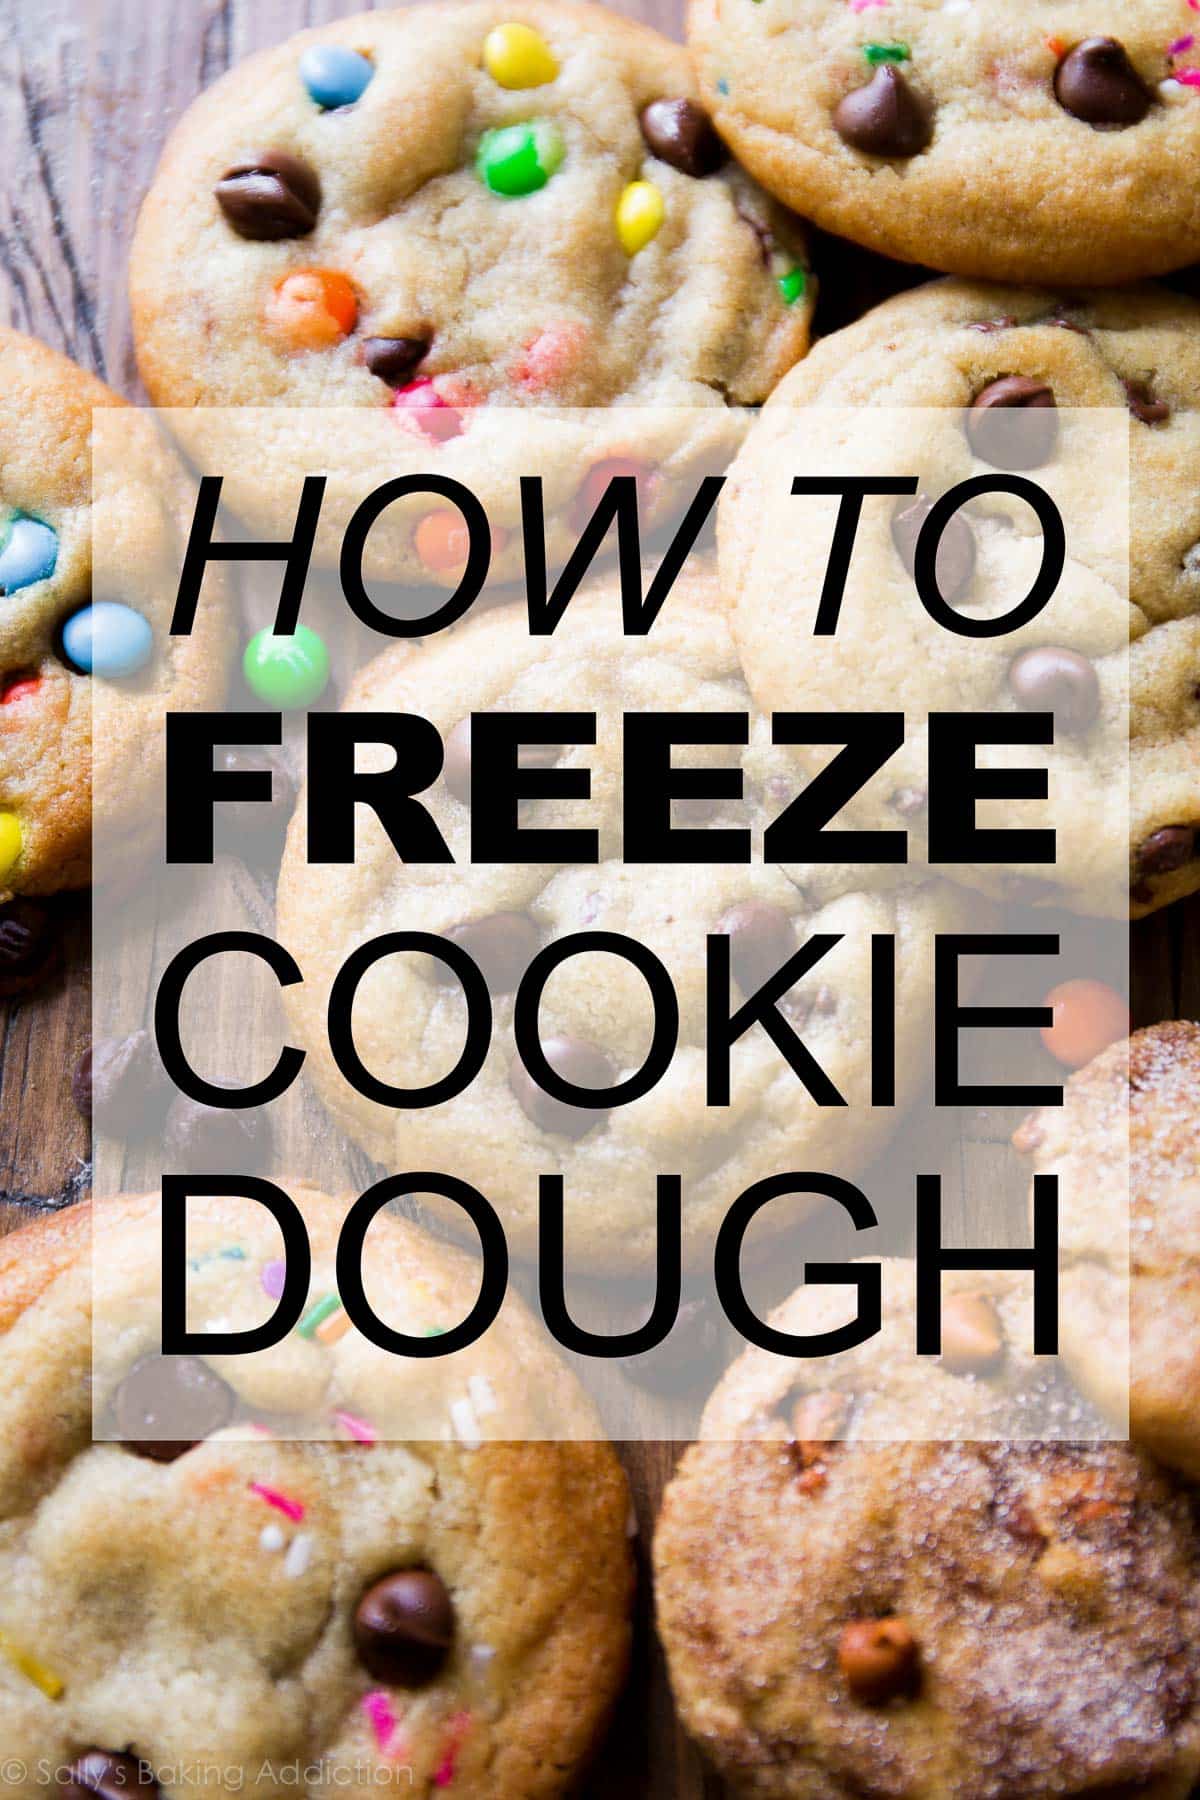 image of cookies with How to Freeze Cookie Dough text